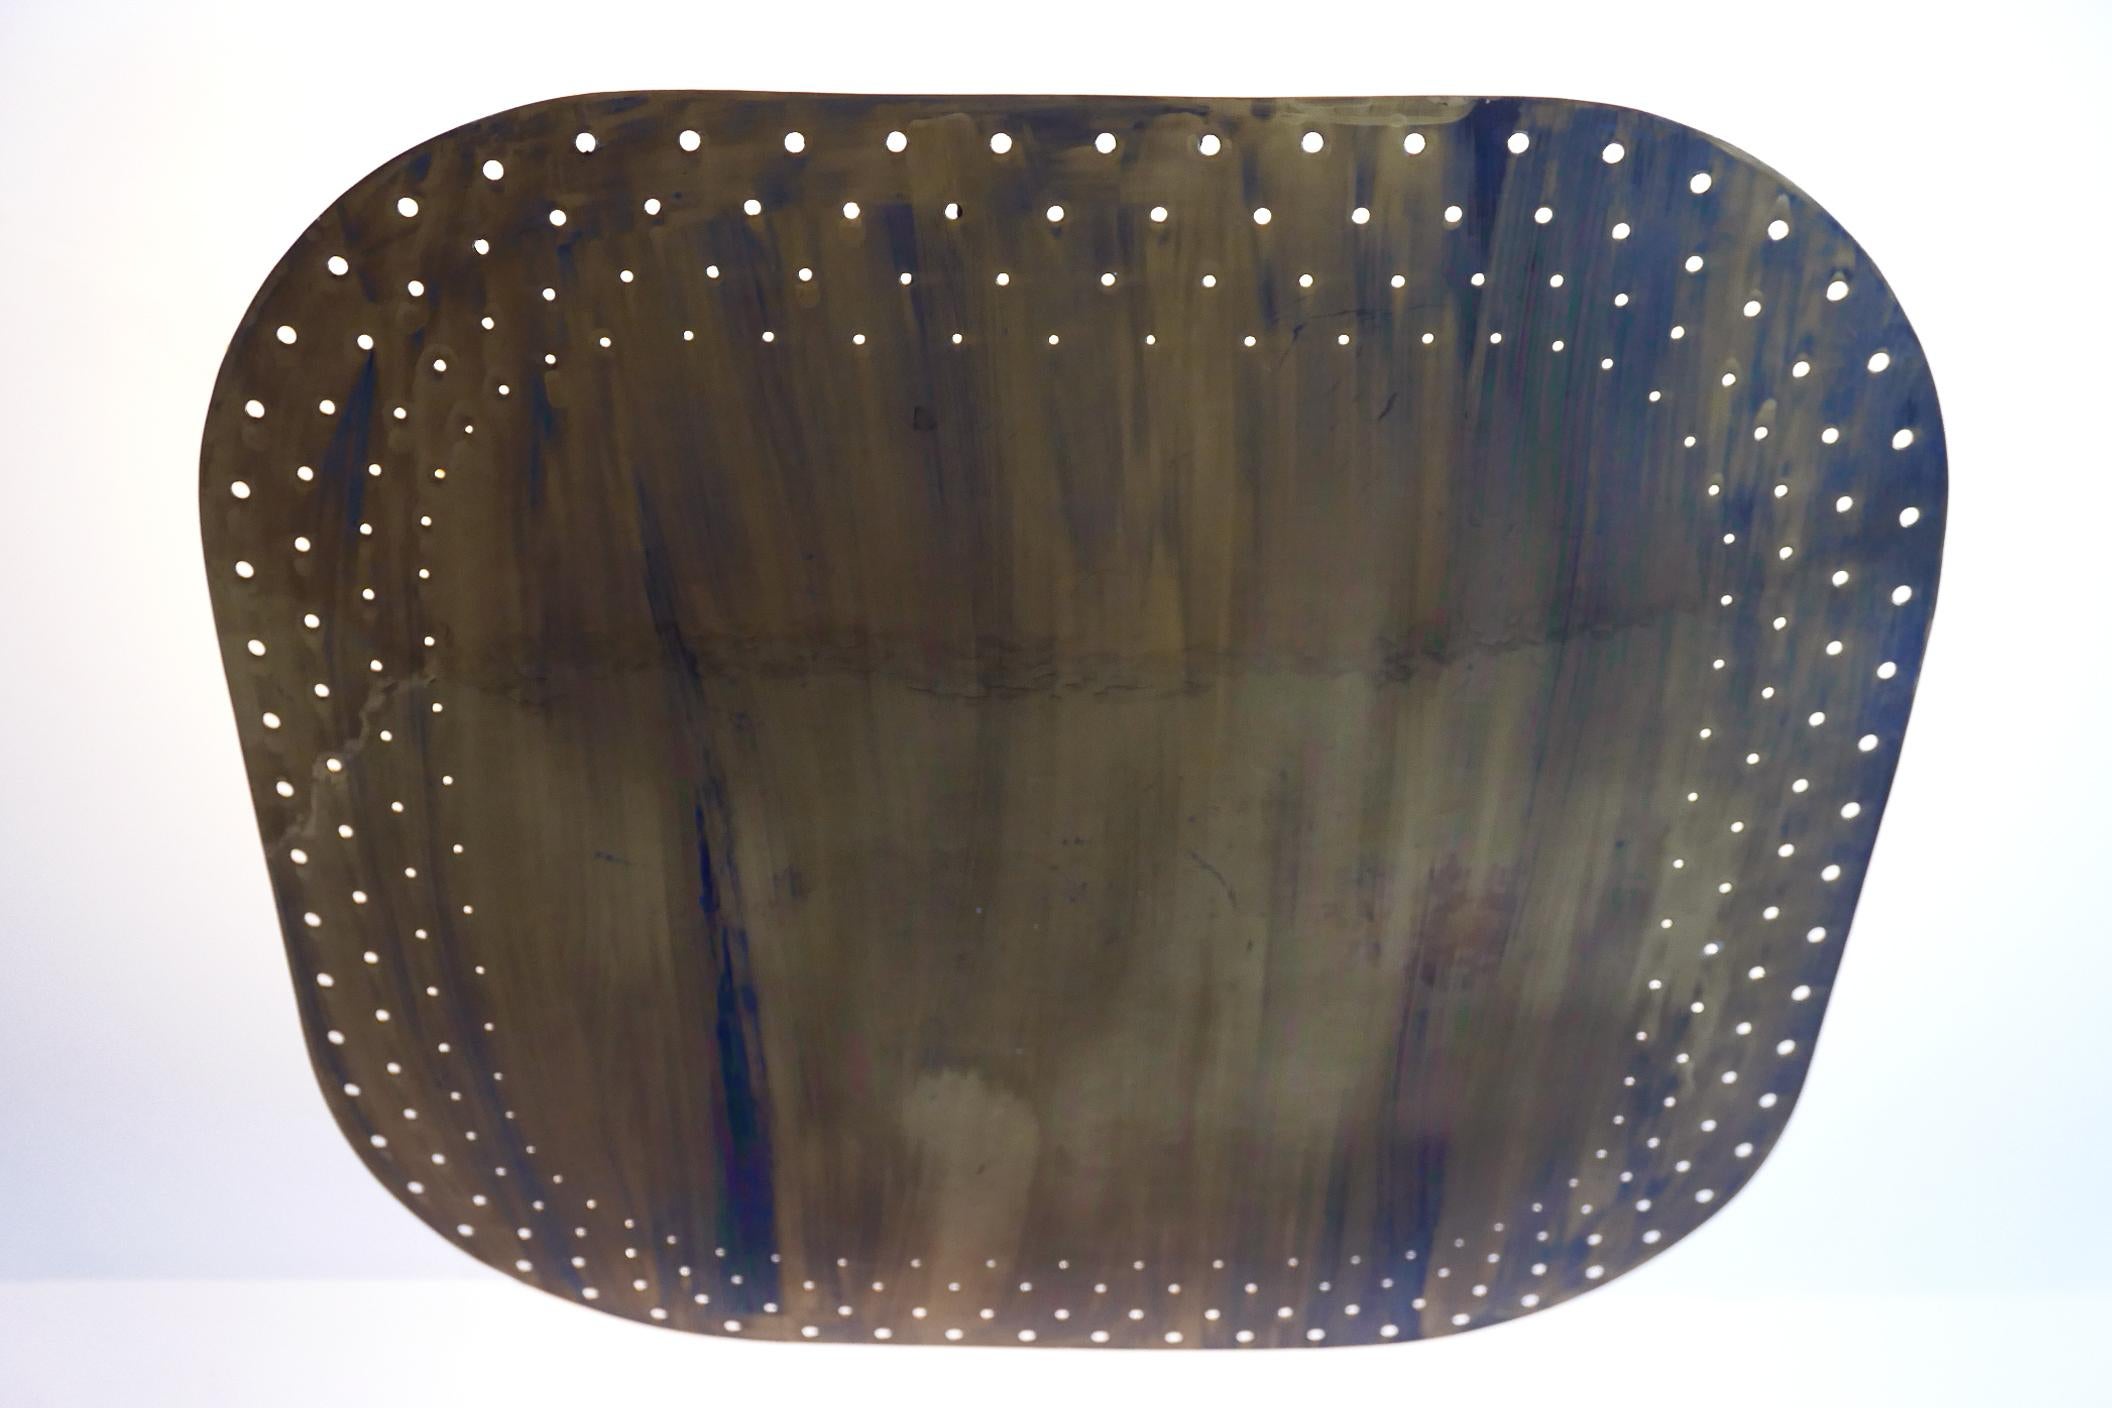 Rare, elegant and large Mid-Century Modern perforated brass ceiling fixture / pendant lamp. Designed and manufactured in Germany, 1950s.

Due to the perforated shade, the lamp makes a breath taking light effect.

Executed in perforated brass